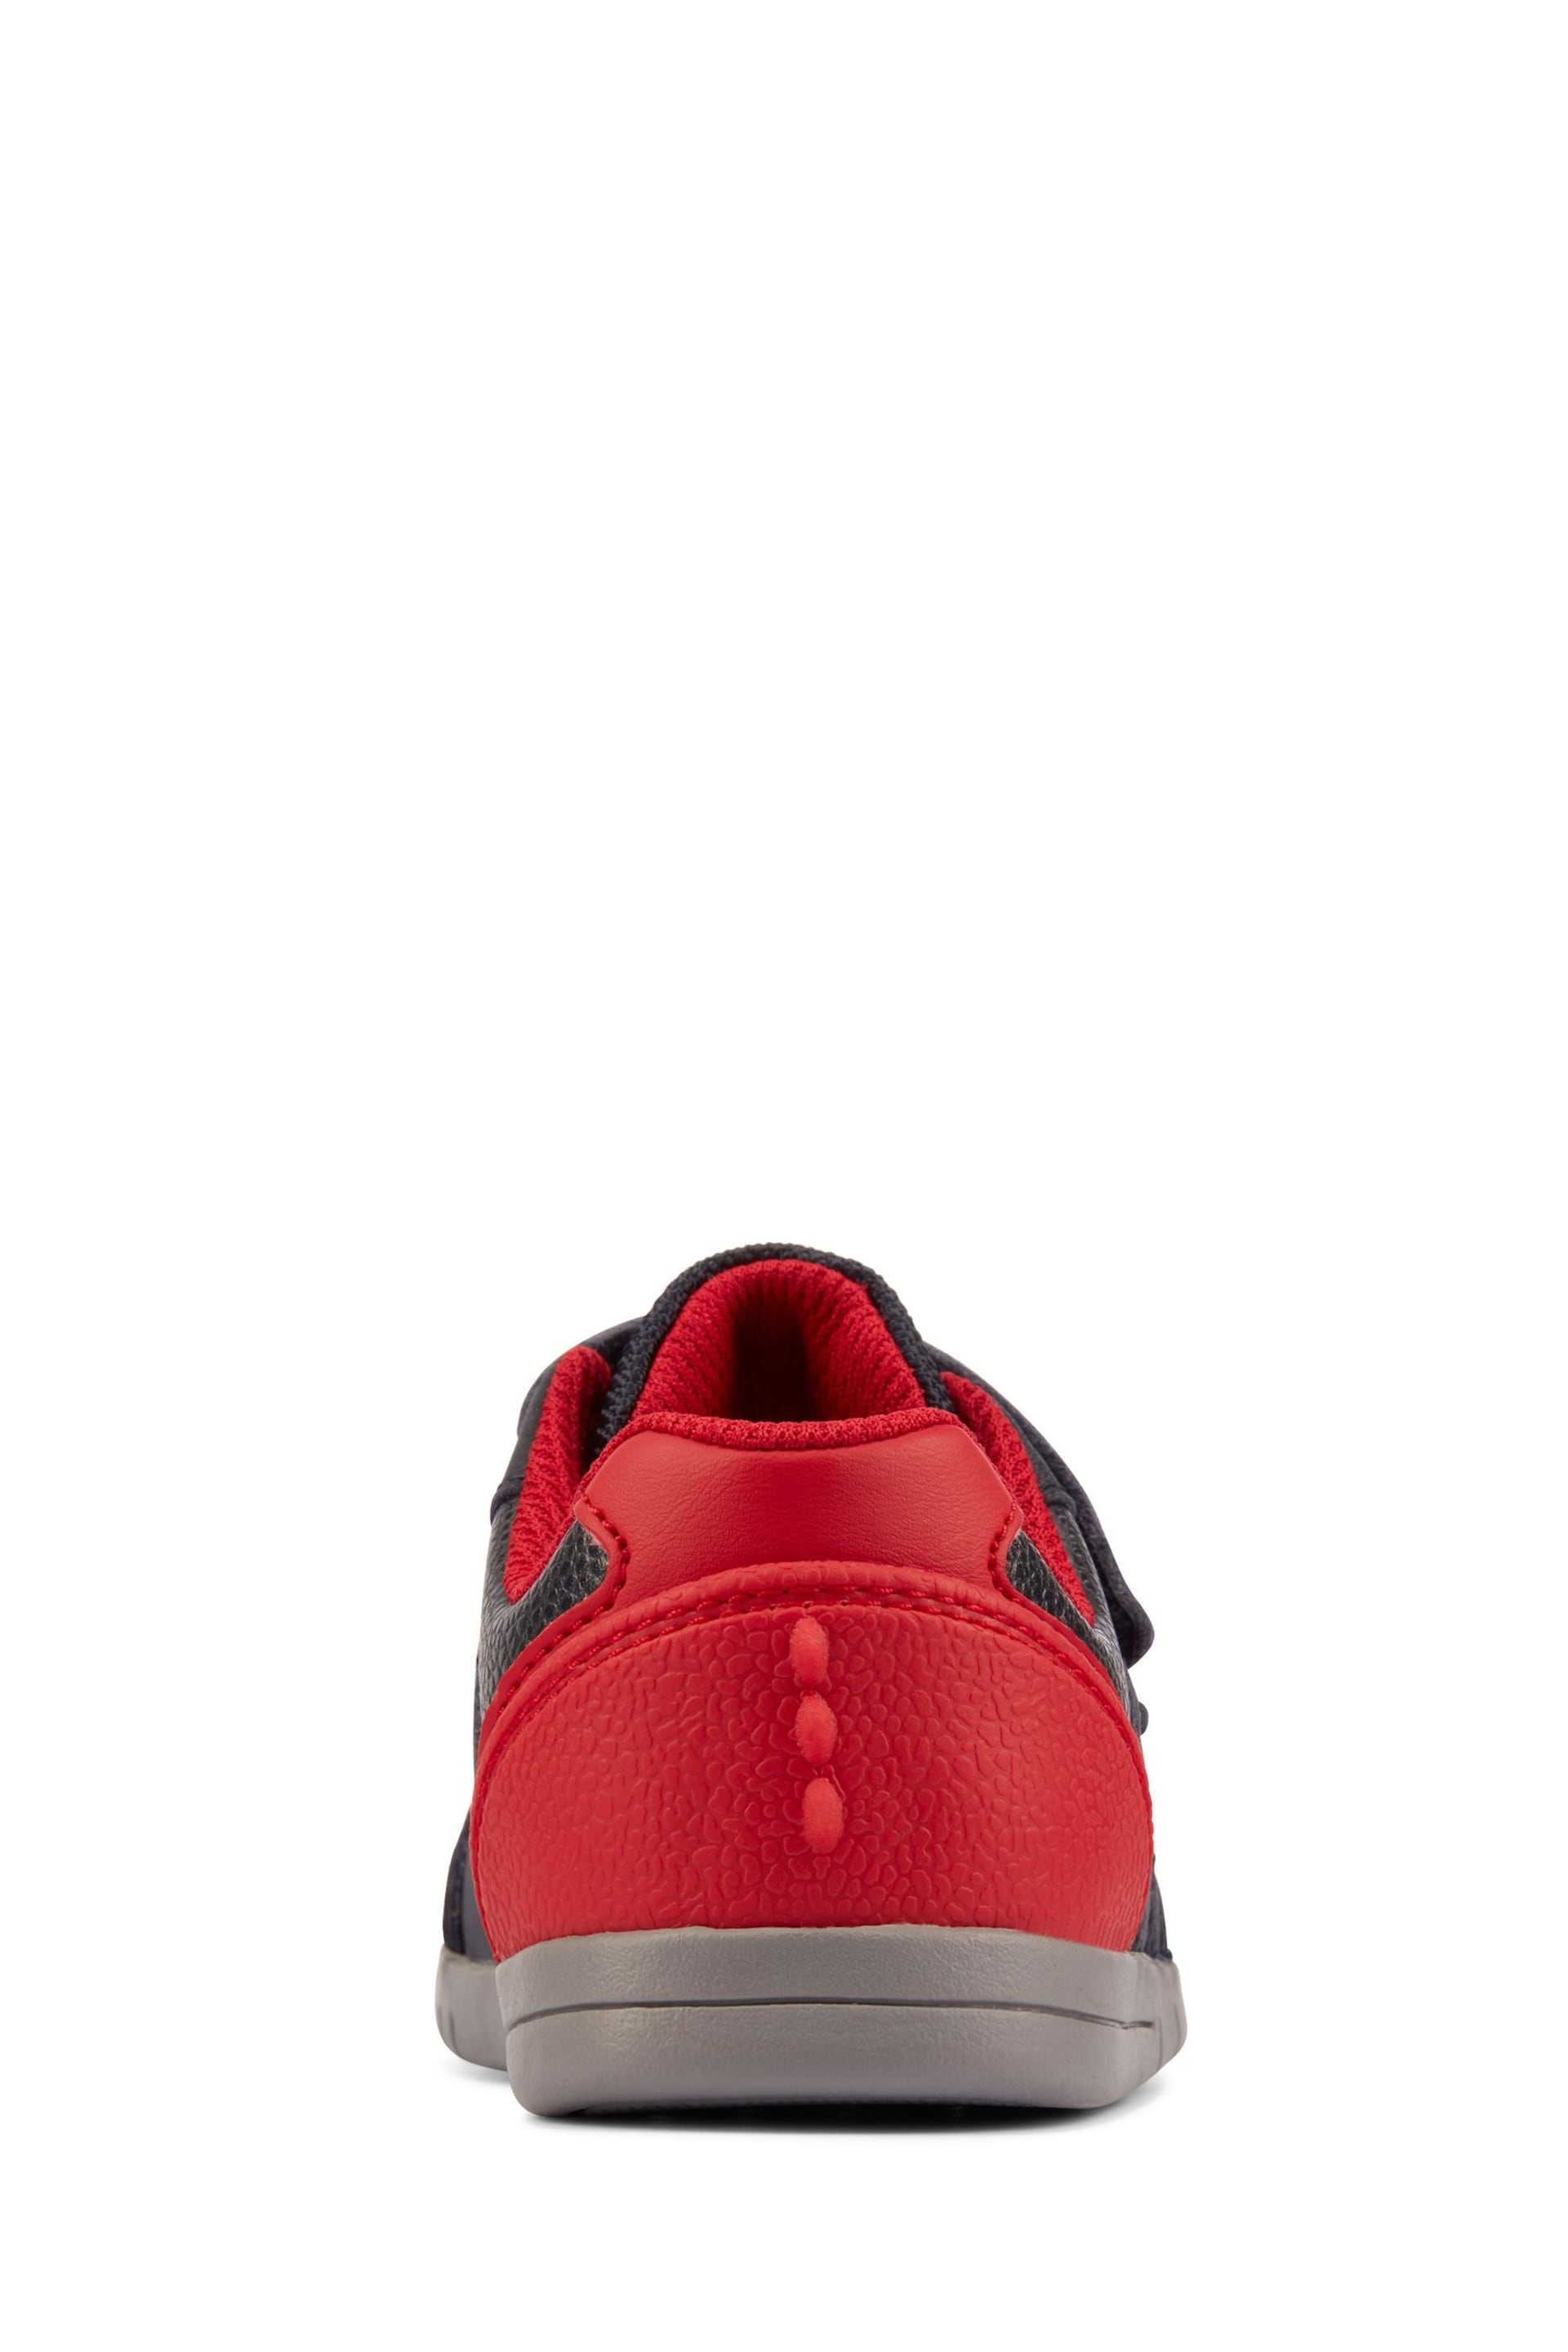 Clarks Navy Blue/Red Multi Fit Leather Dinosaur Trainers - Image 6 of 7